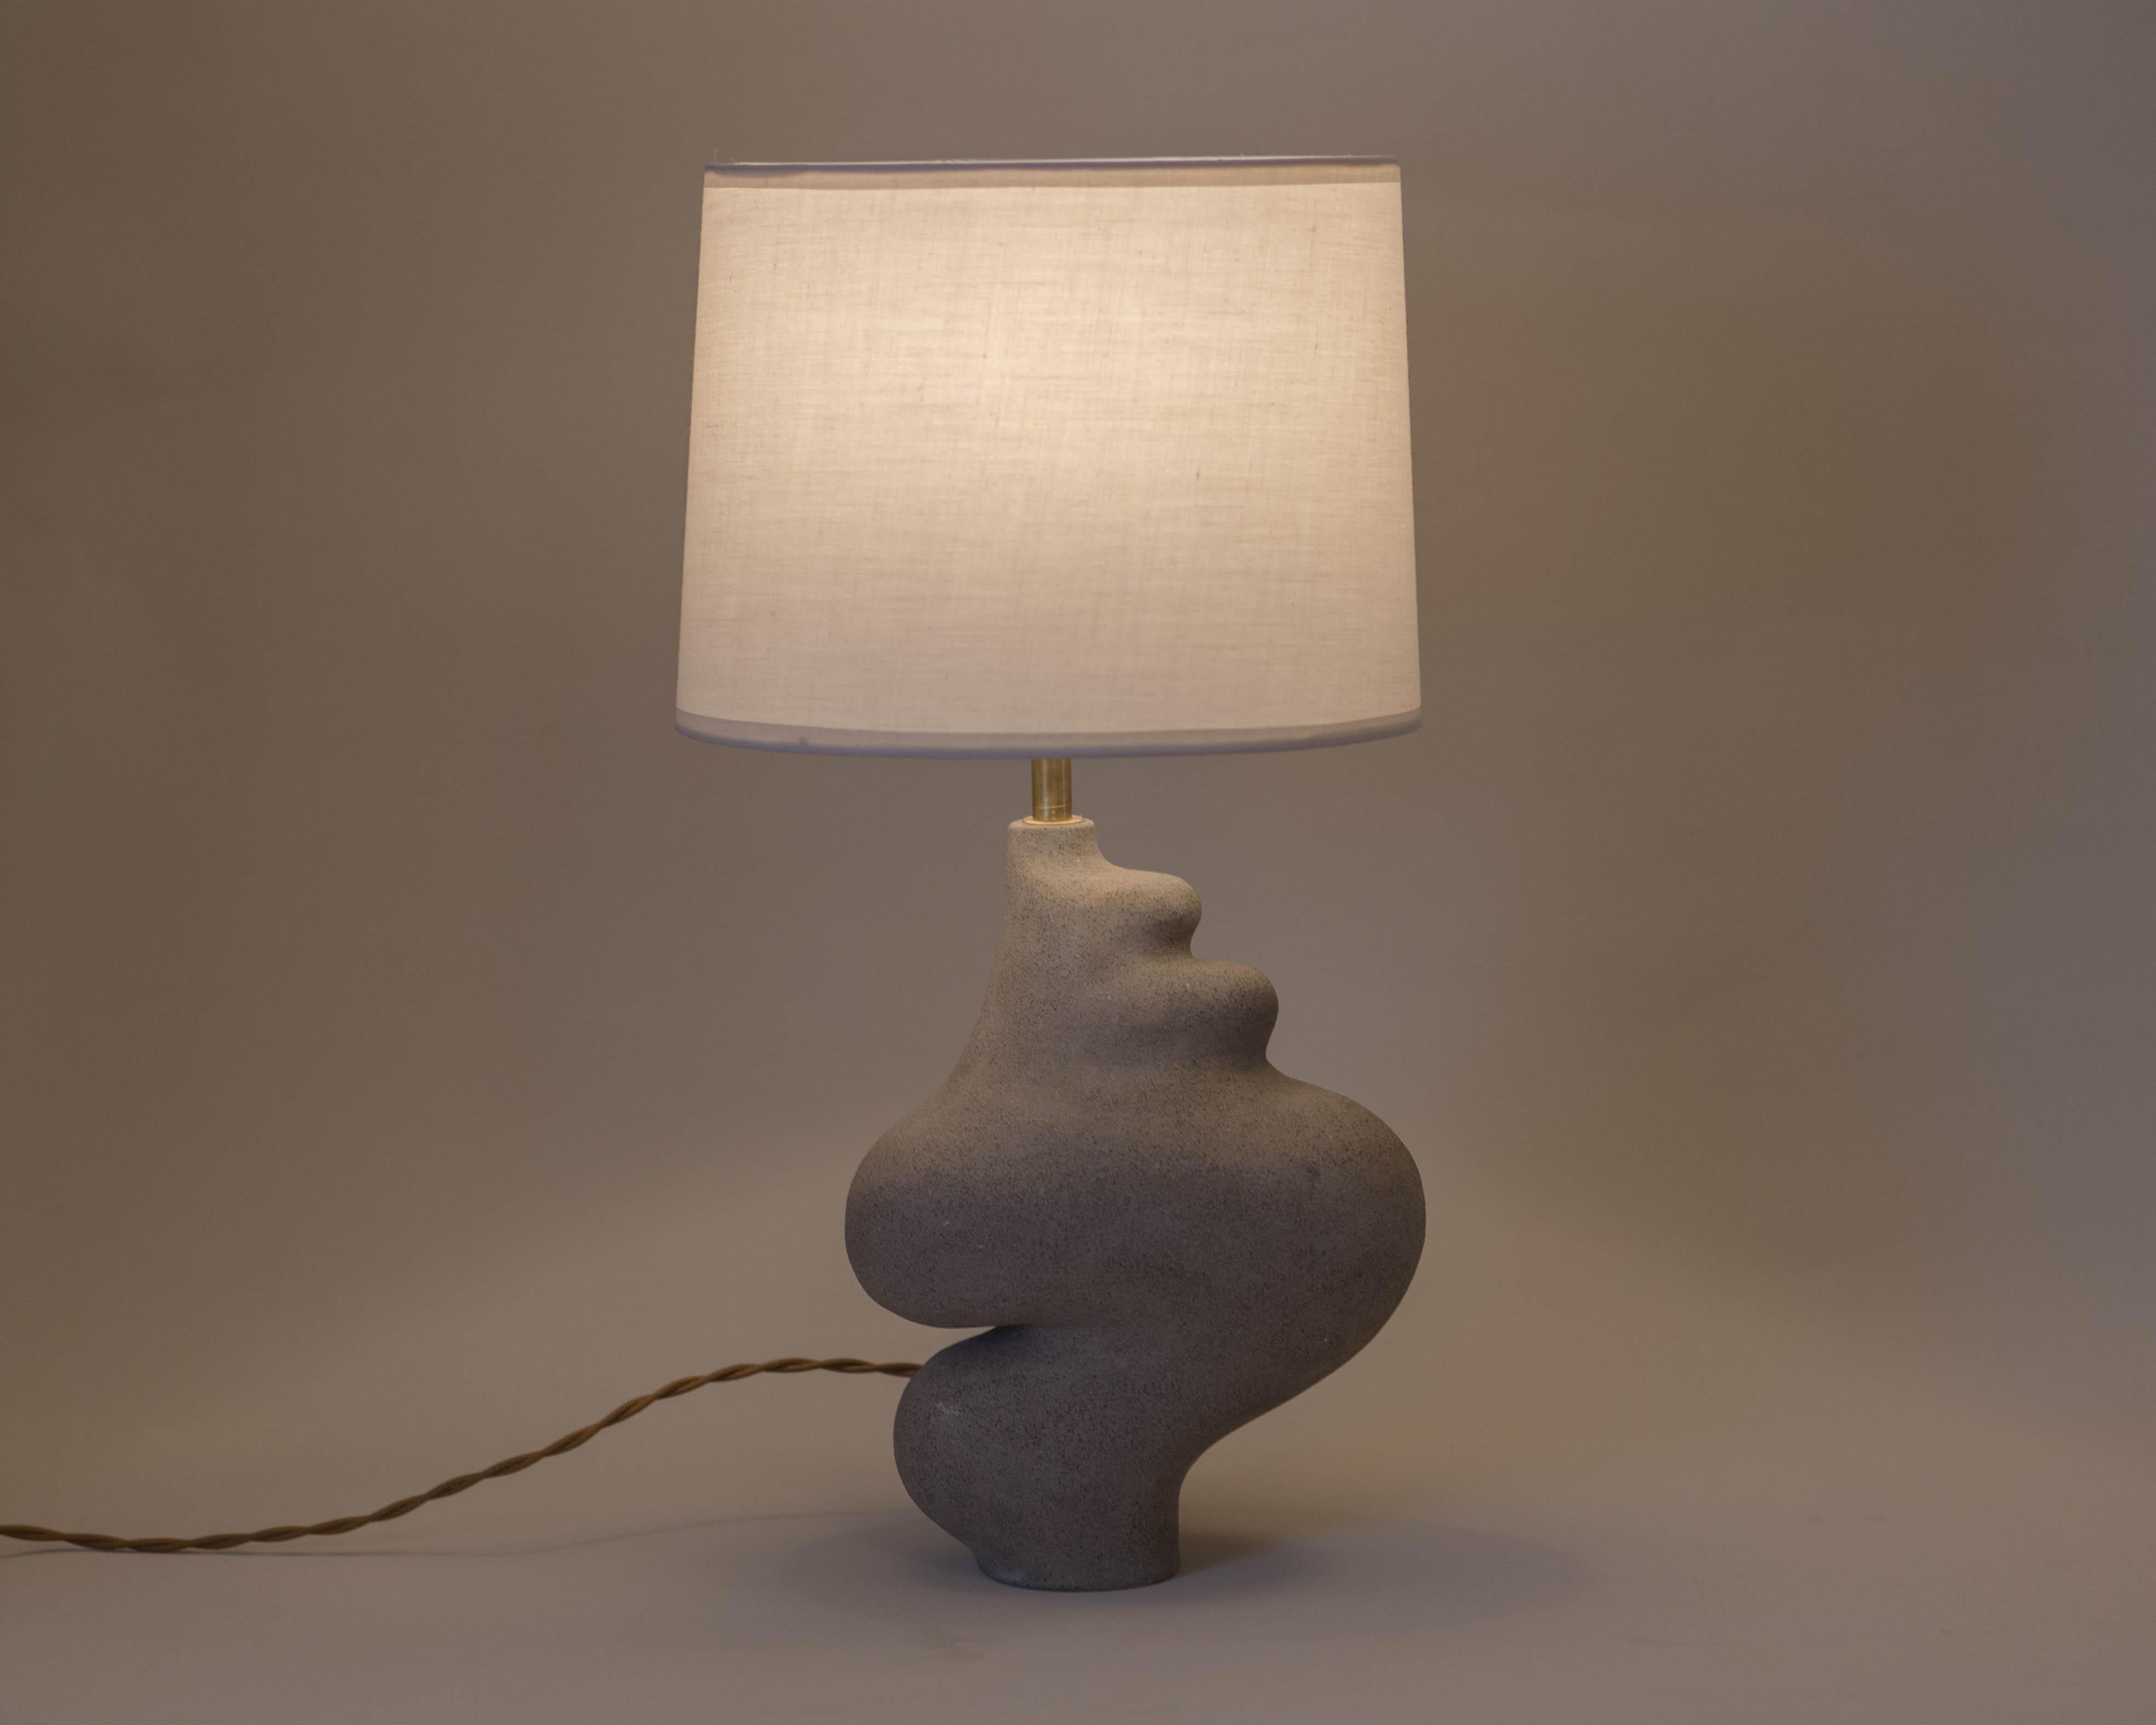 Muf lamp by Aysun Ay
Dimensions: D 20 x H 44
Materials: stoneware ceramic, brass hardware, cotton drum, CE certified twisted cable, non-slip bottom sole

Sculptural pieces can vary slightly as each is a unique piece of art.
All our lamps can be